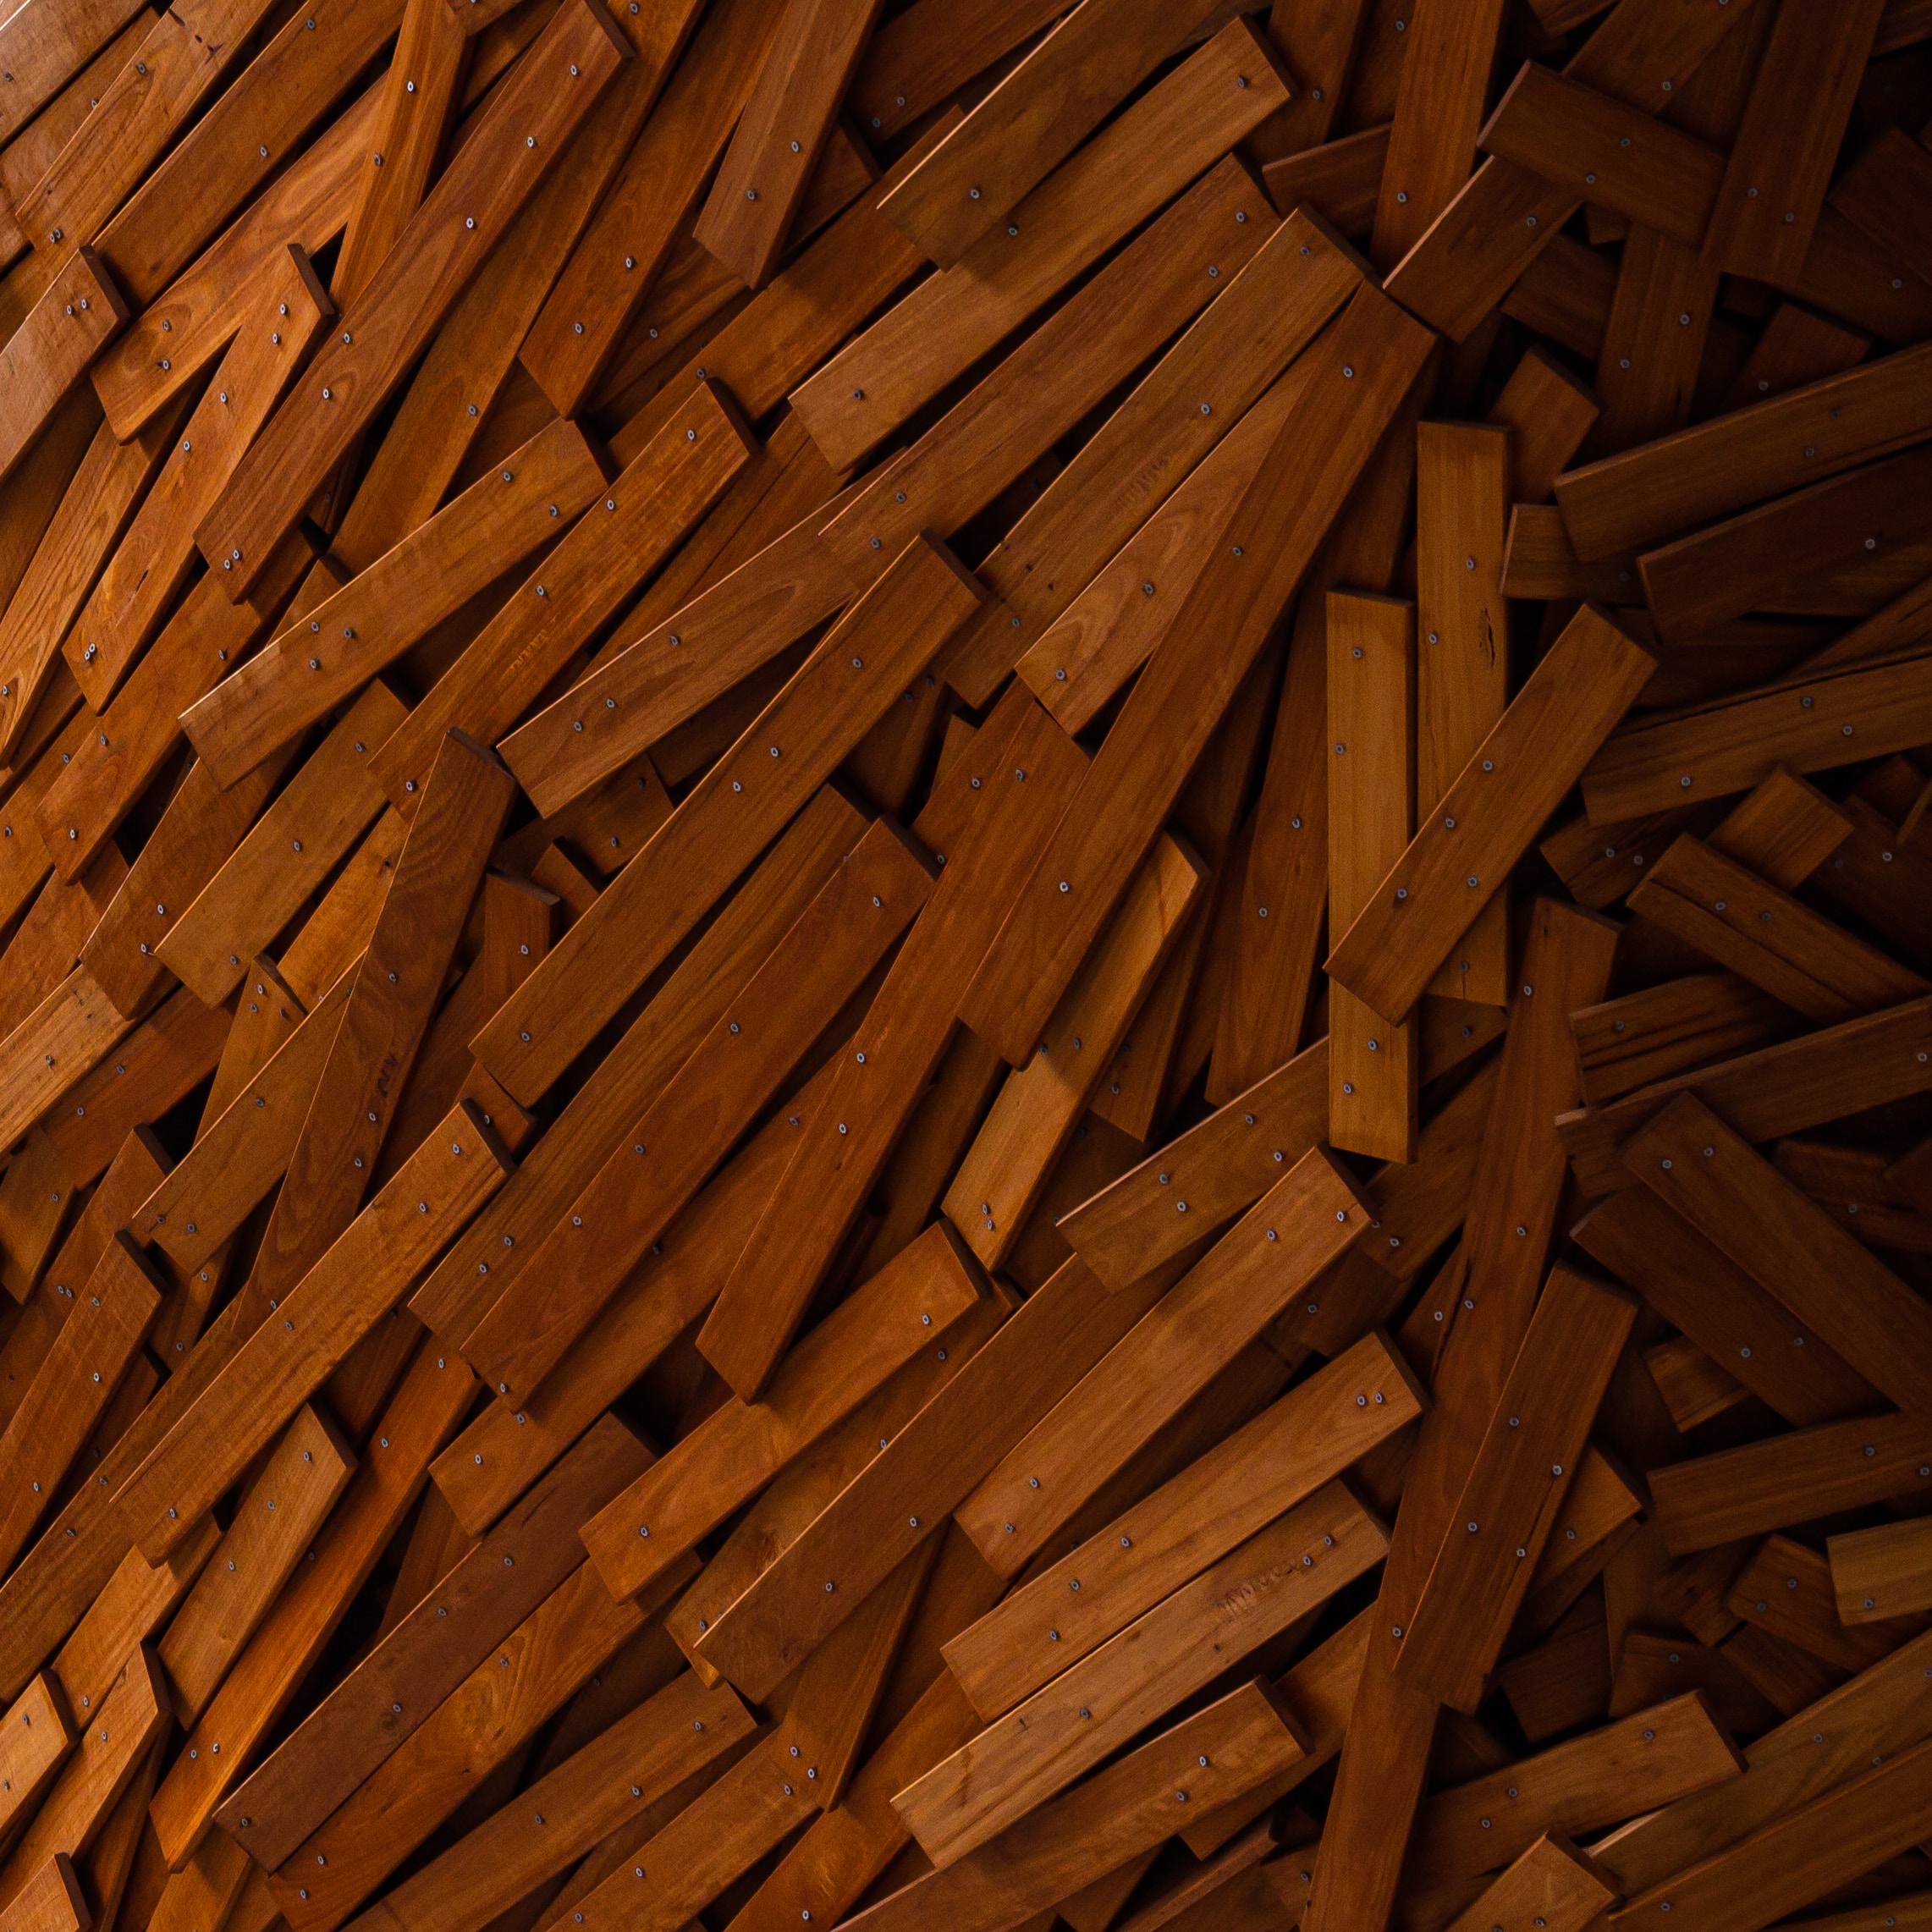 wood, wooden, texture, textures, brown, planks, strips 1080p